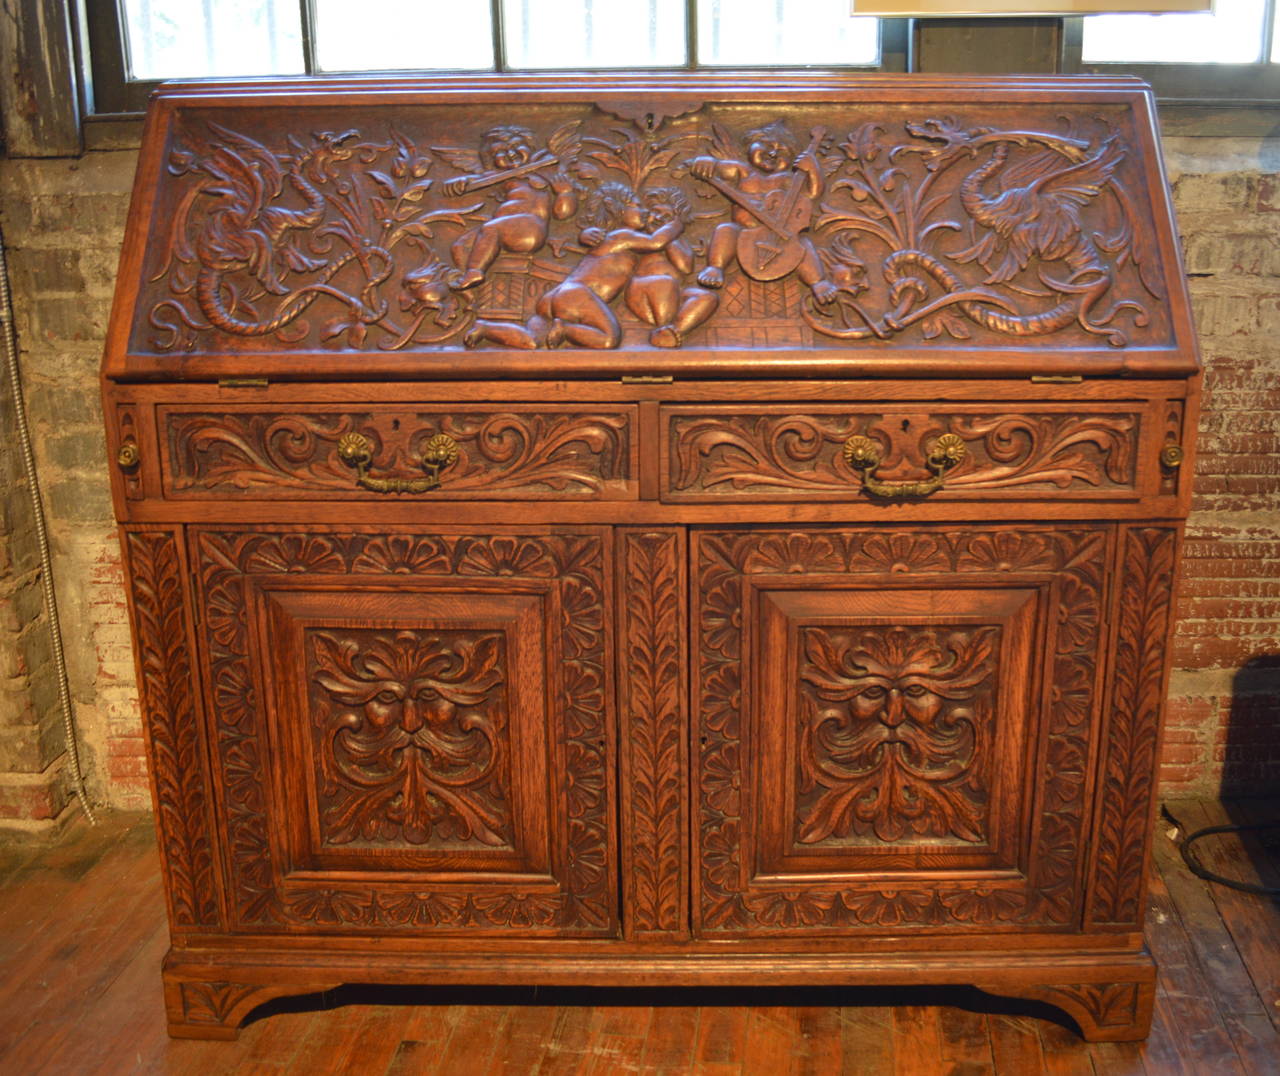 Unusually carved Italian Renaissance style desk, central fall panel of band of putti playing string instruments, fitted interior, prospect door with carved green man, slant fall front, lower section with two drawers over two-paneled doors with green